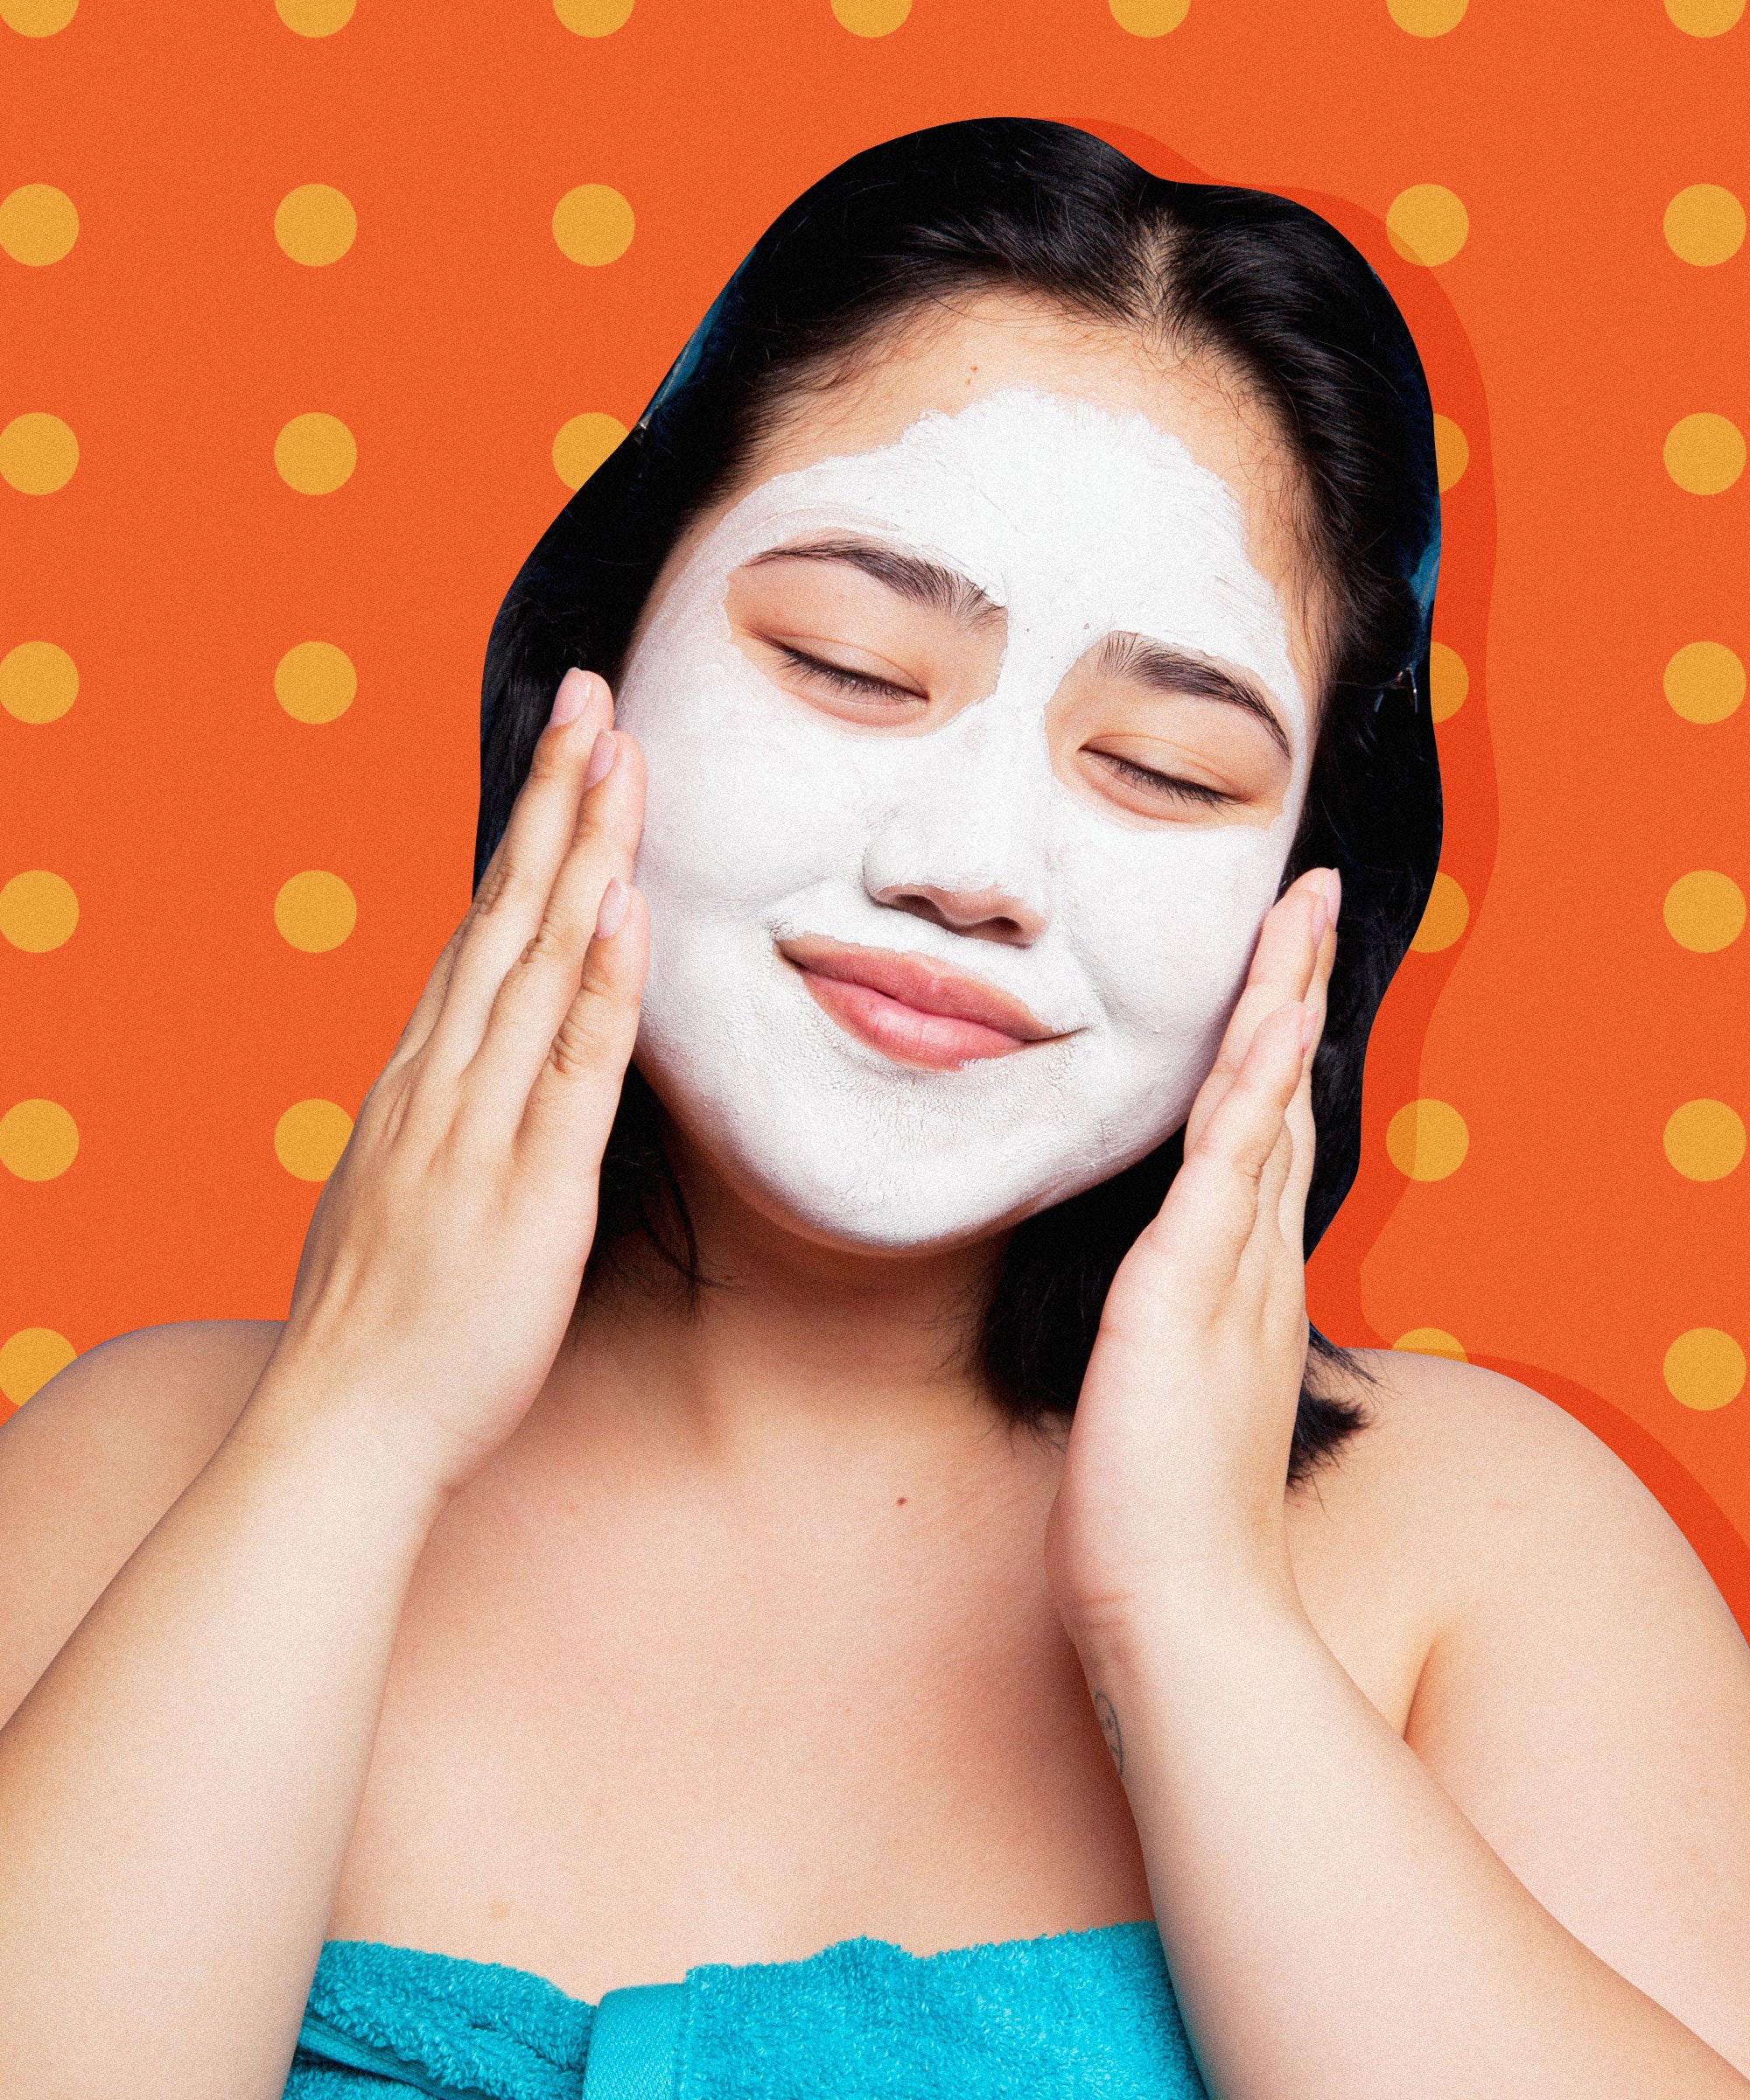 20 Best Face Exfoliators for Softer, Brighter Skin: Scrubs, Peels